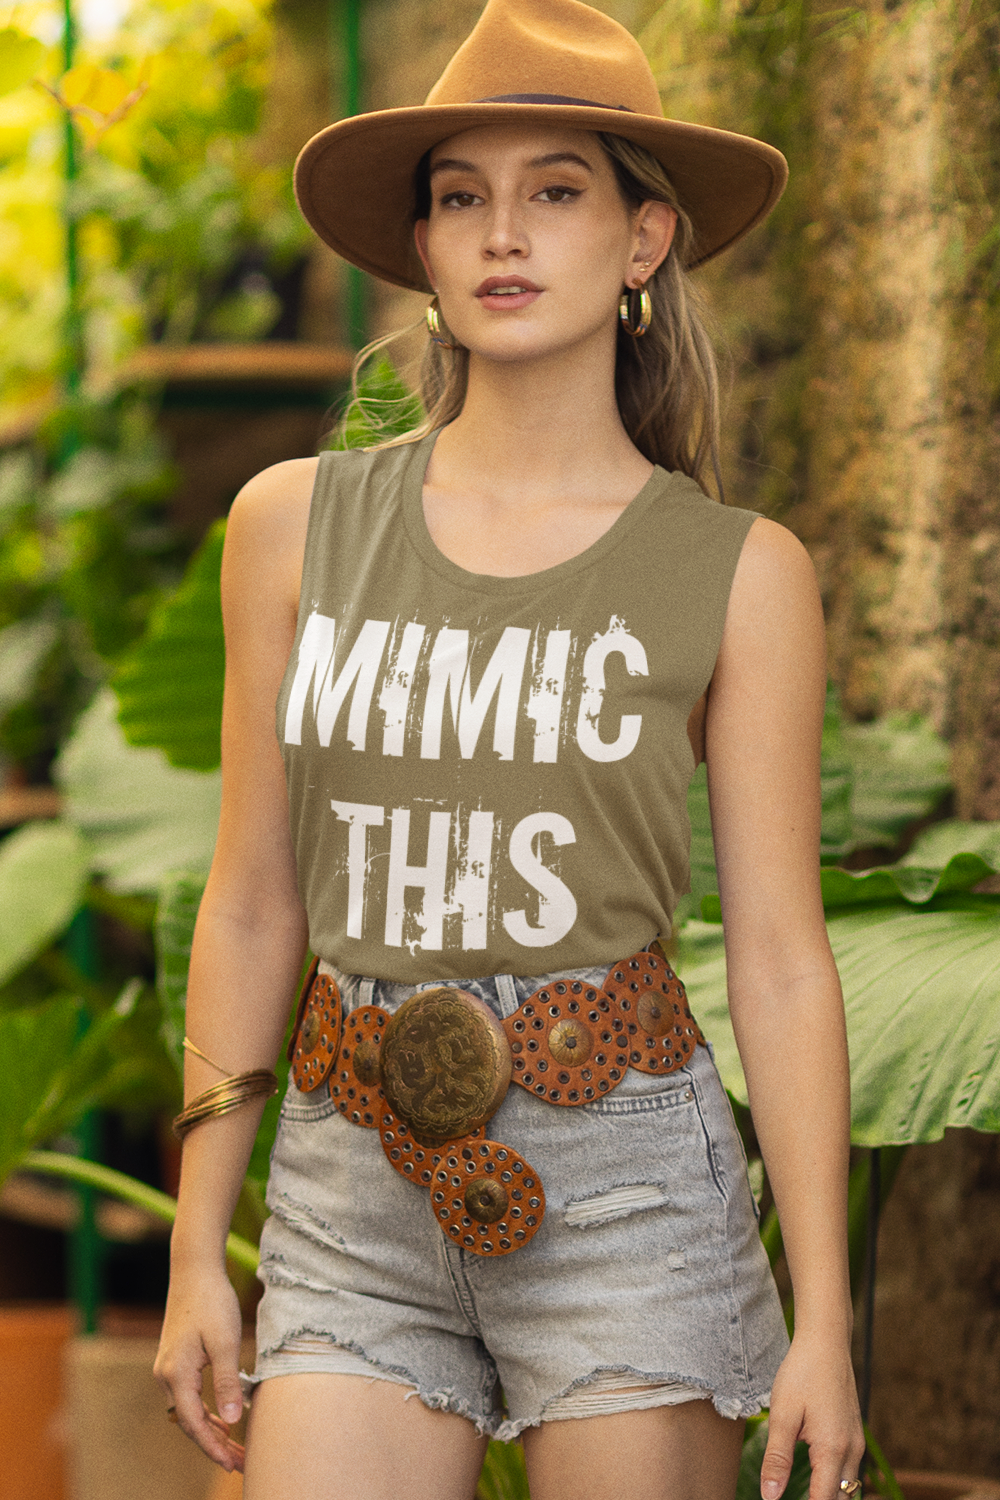 Mimic This Women's Muscle Tank Top